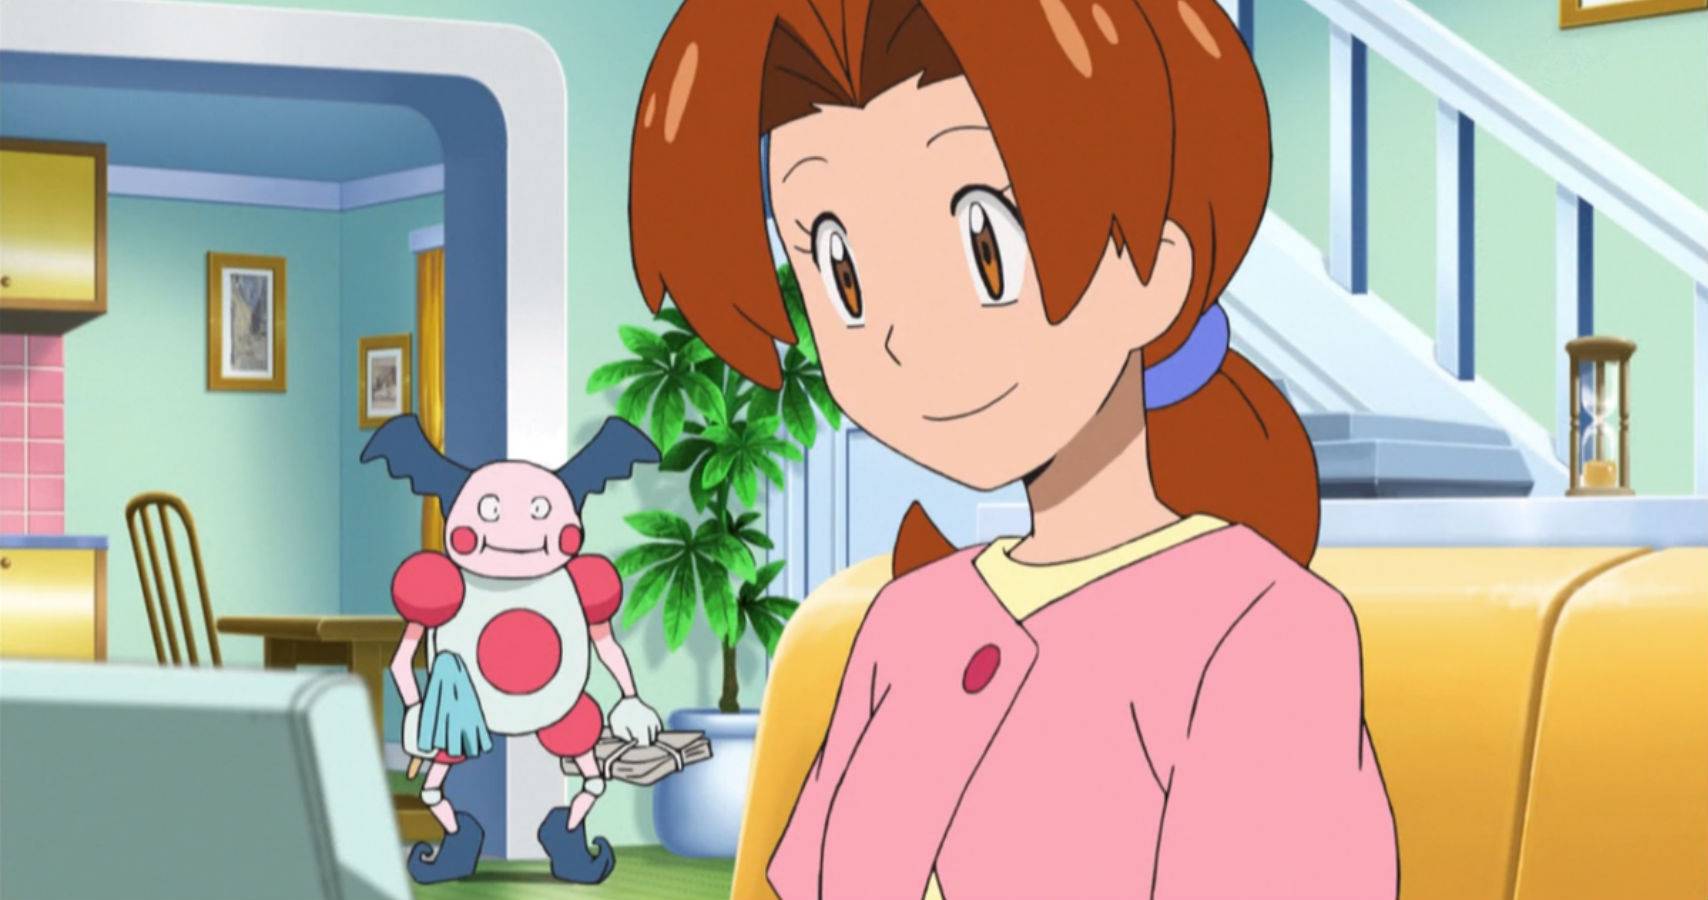 Ashes mom and mr mime